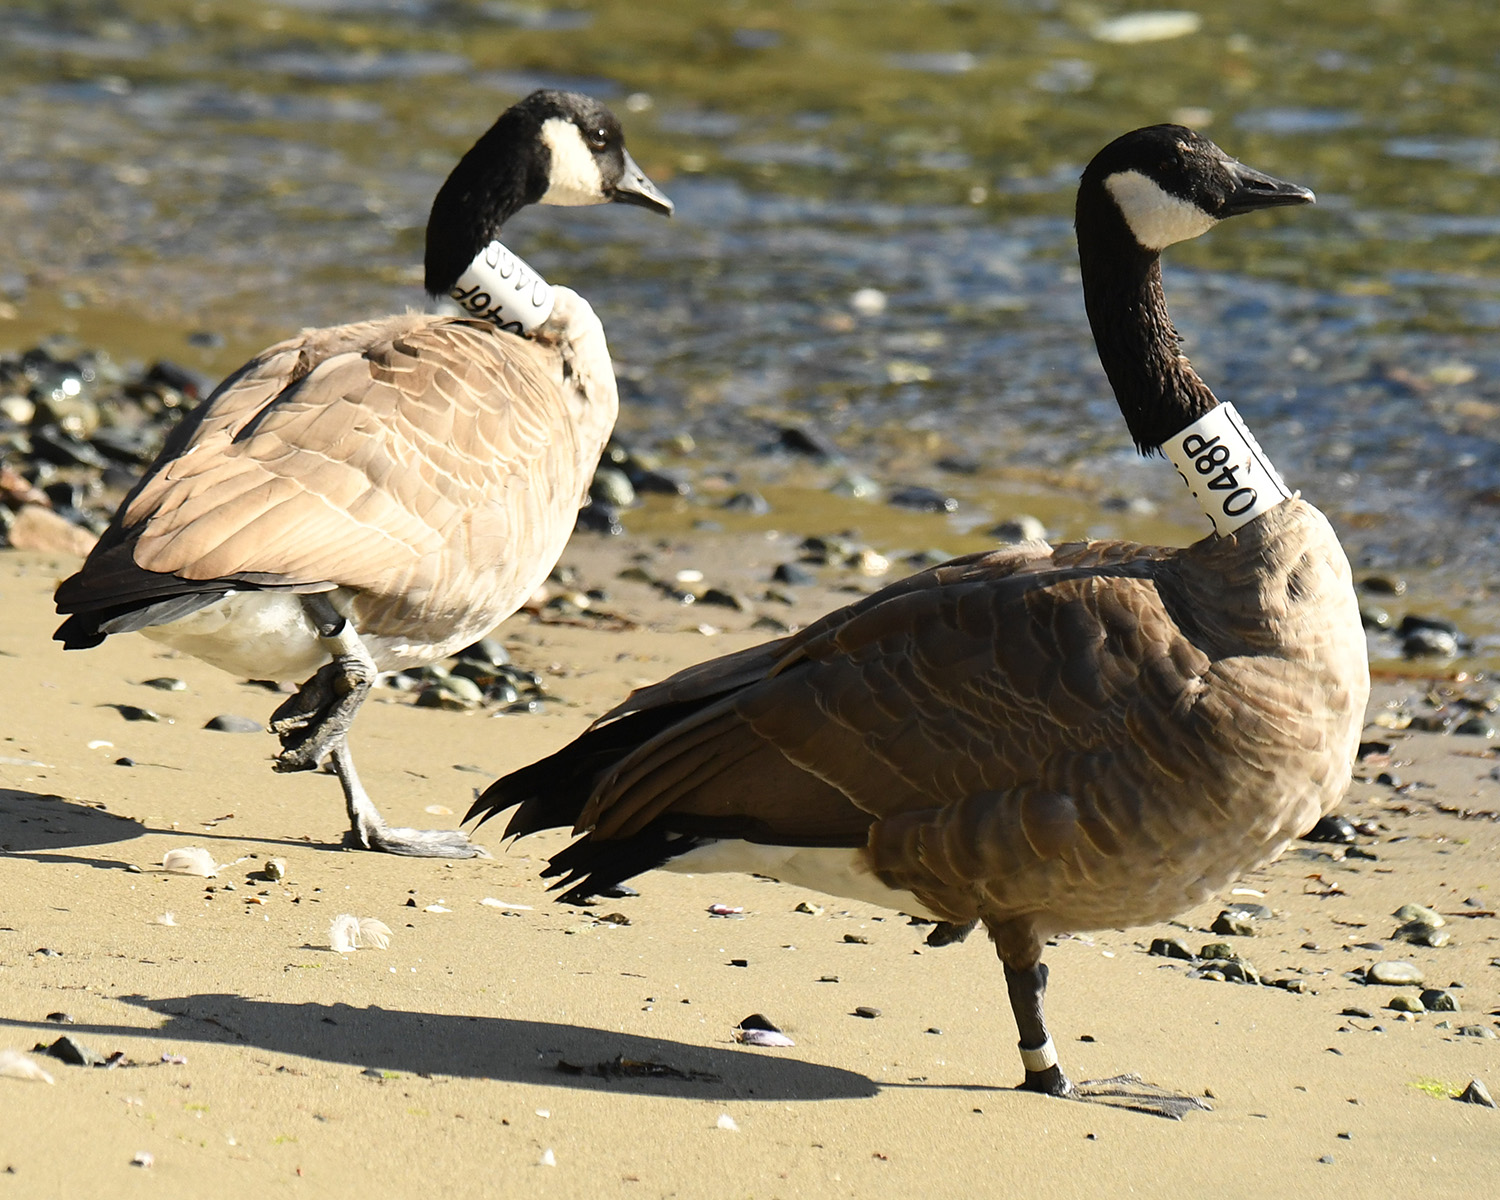 Hammond Bay geese loafing right where they were banded - Morningside Park, Hammond Bay. Photo c/o Ken Langeliers